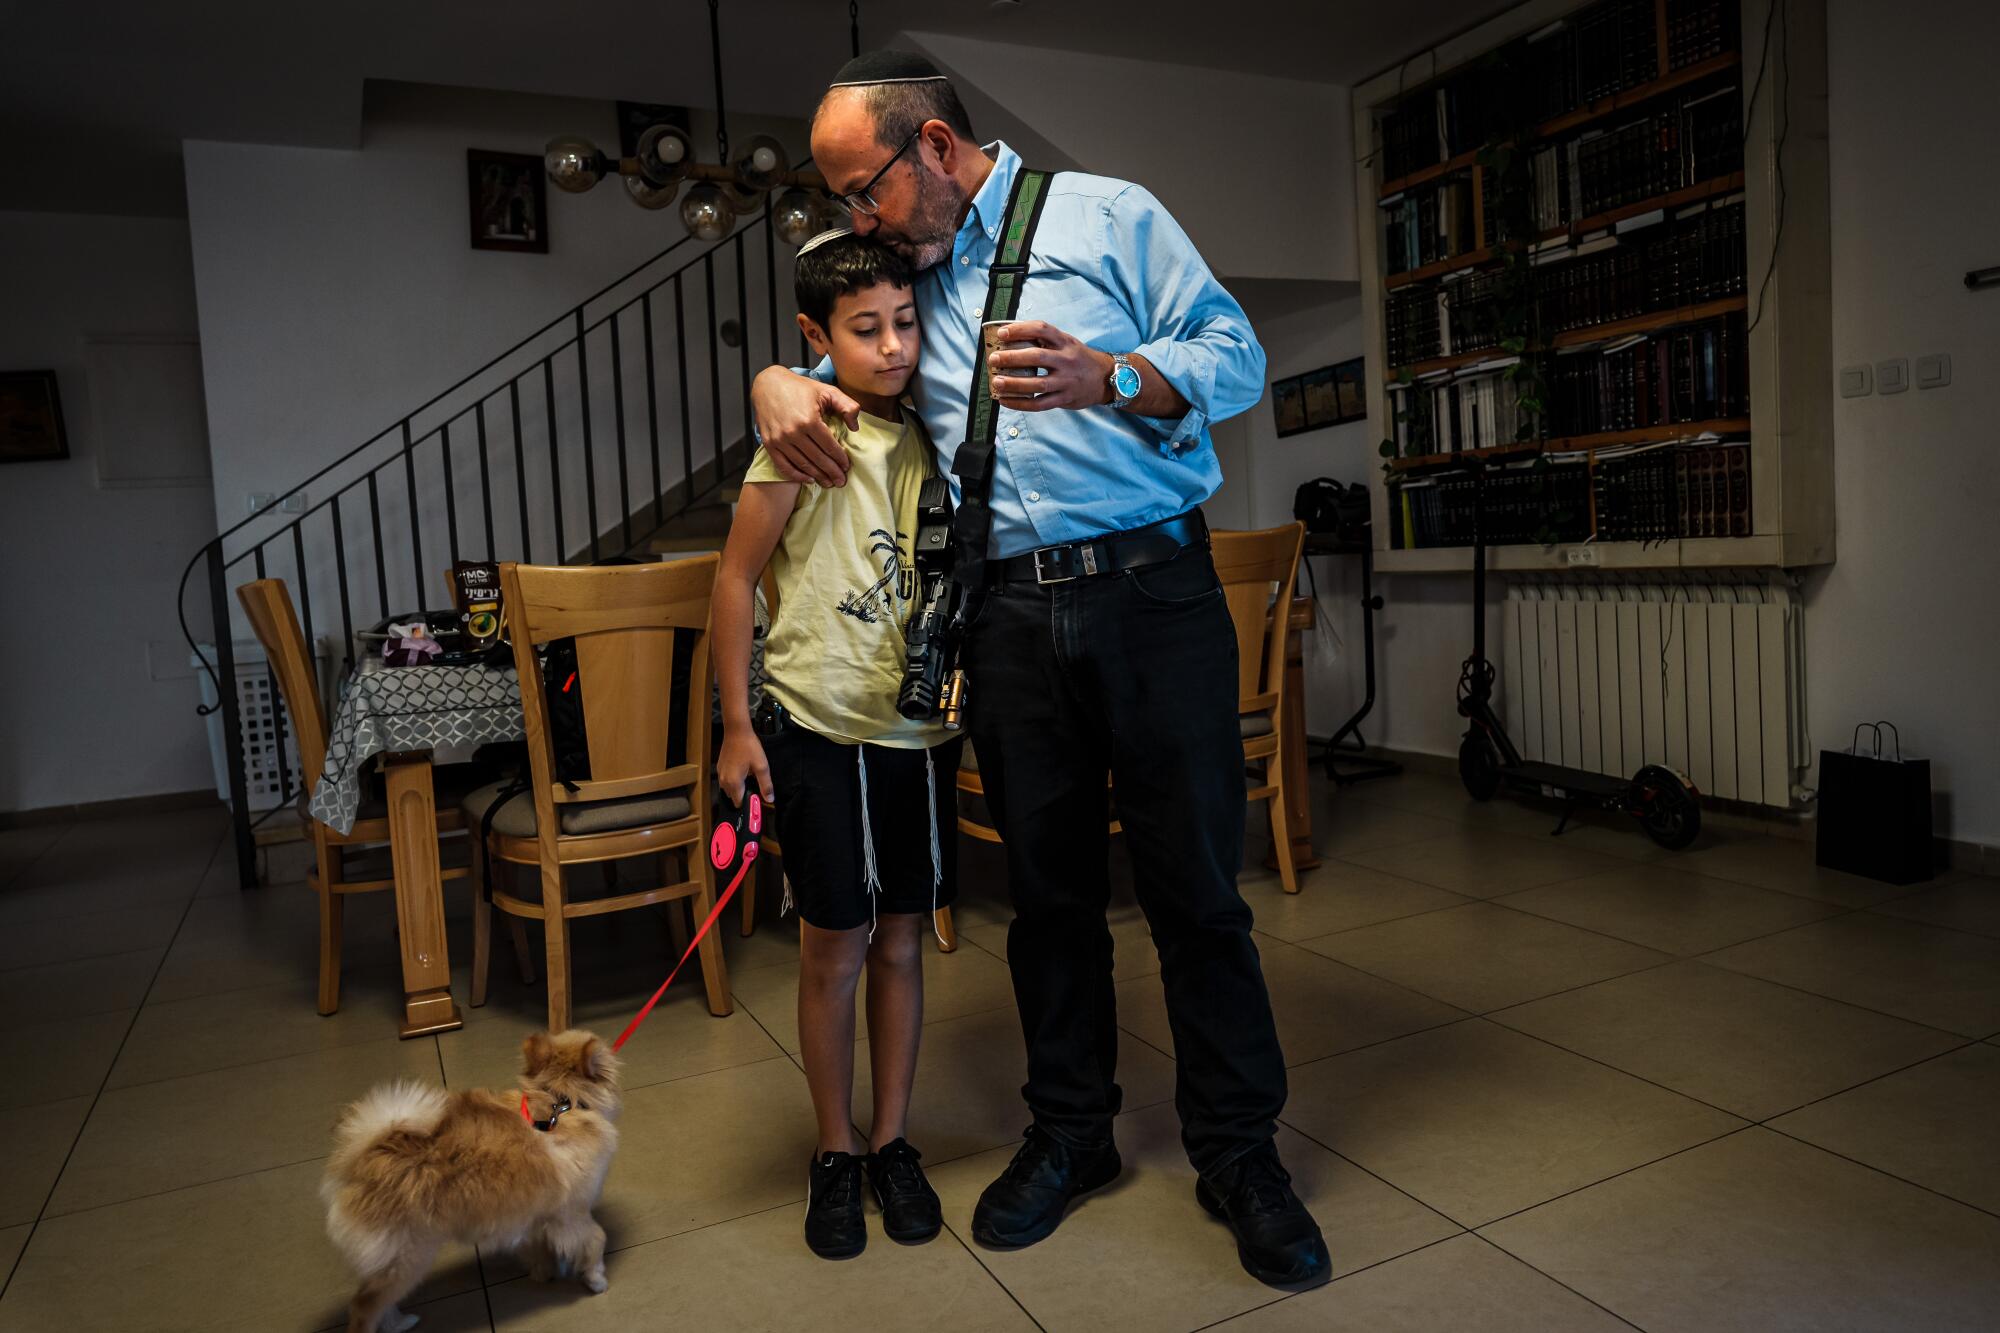 A man, wearing a long-sleeved blue shirt, dark pants and an assault weapon, hugs a boy holding the leash of a dog in a home